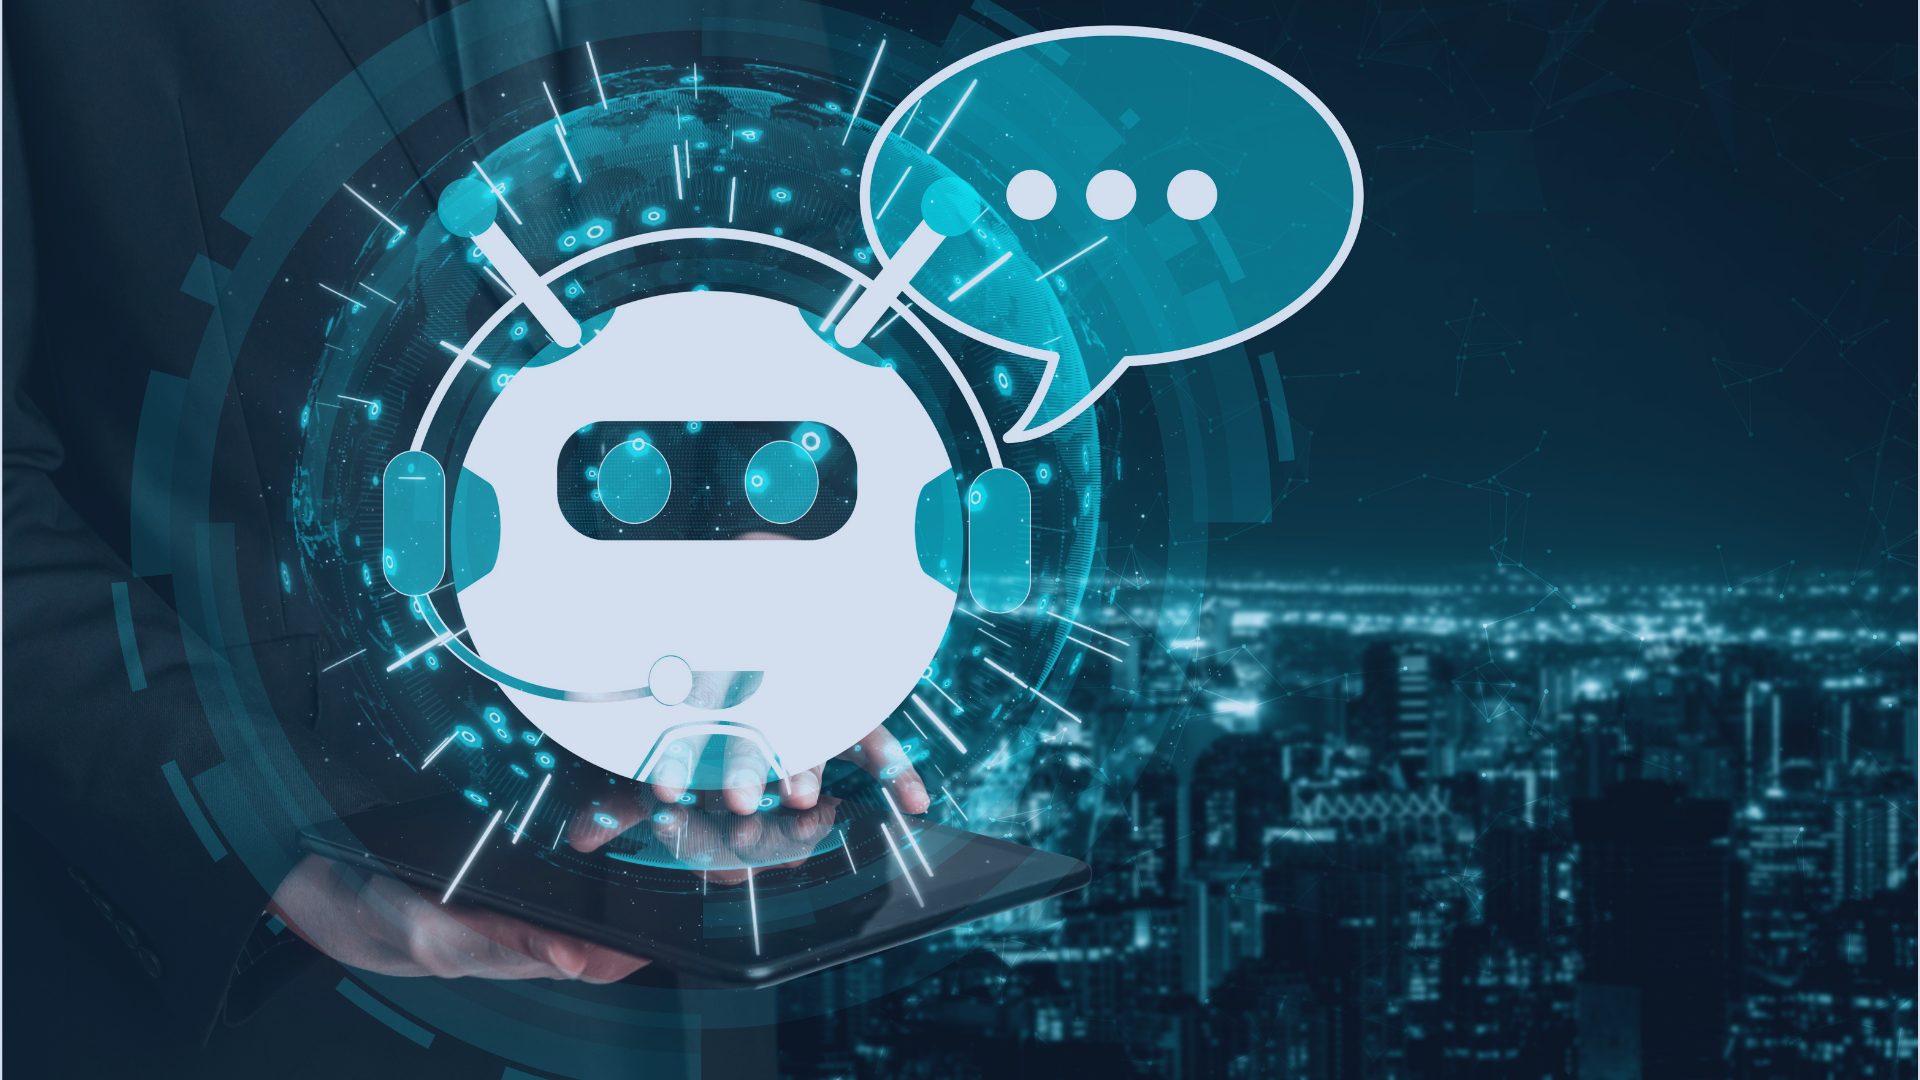 Abstract image of a chatbot communicating with a customer